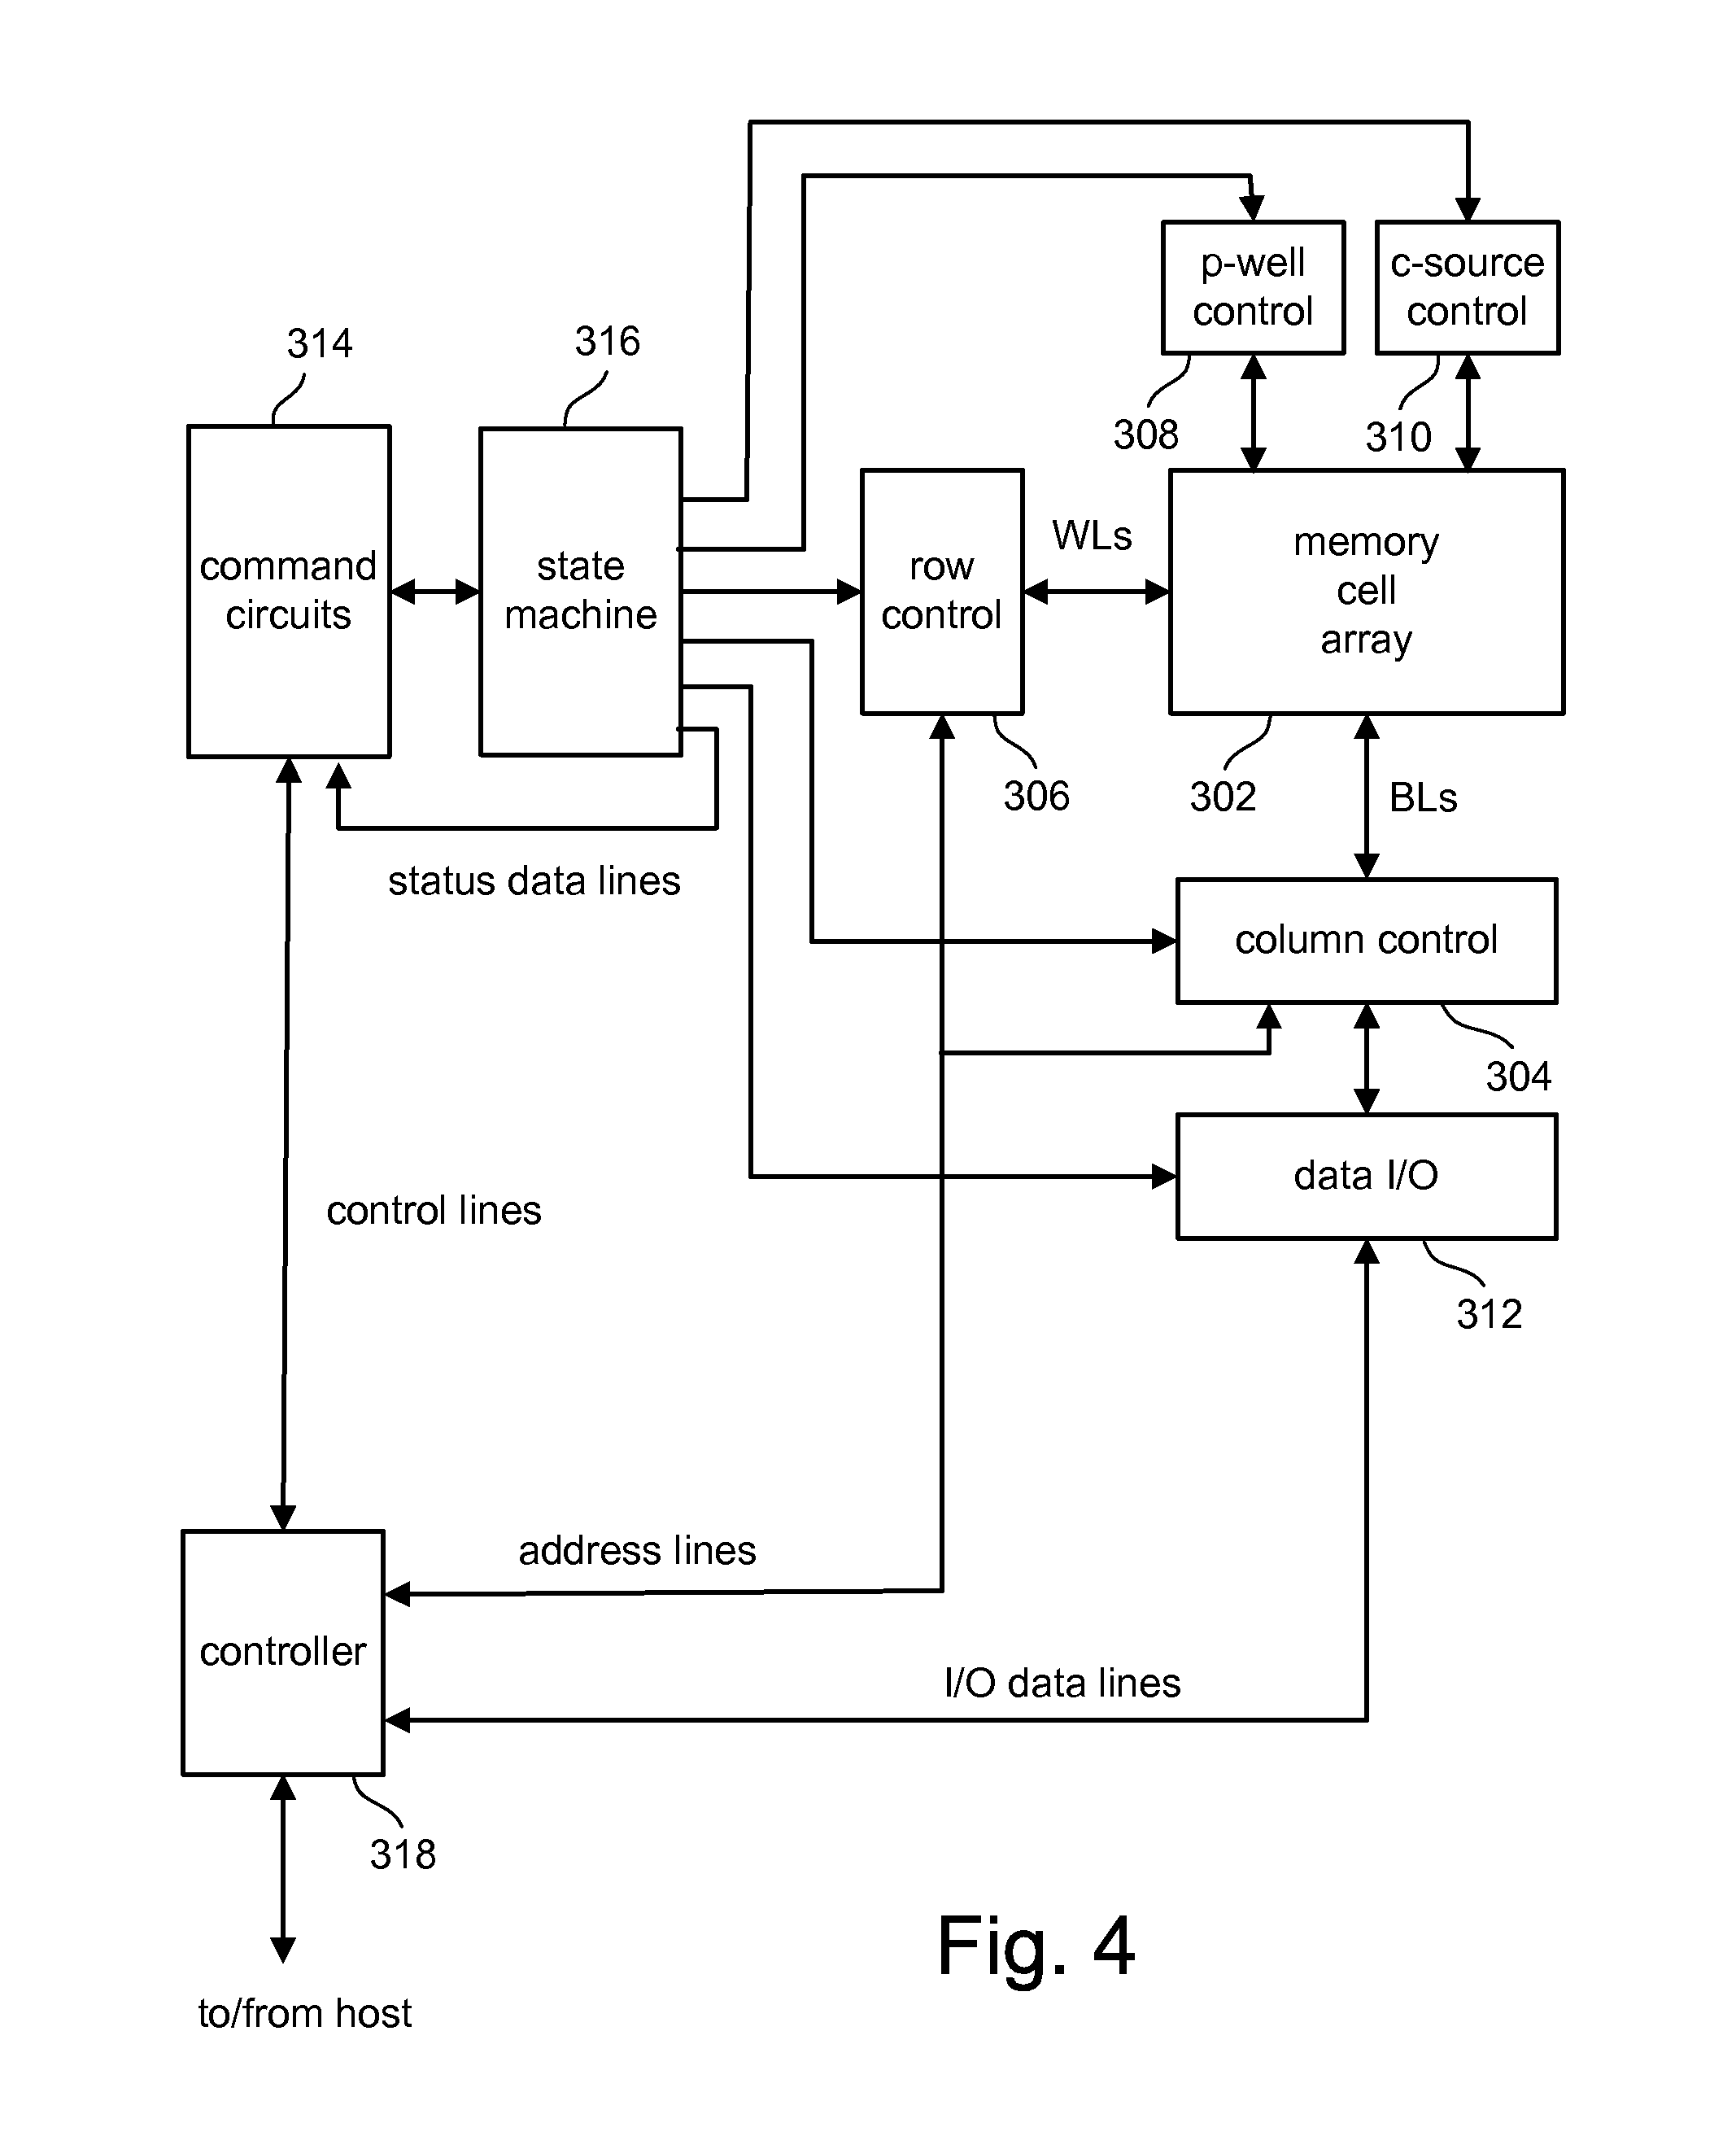 Page by page ecc variation in a memory device